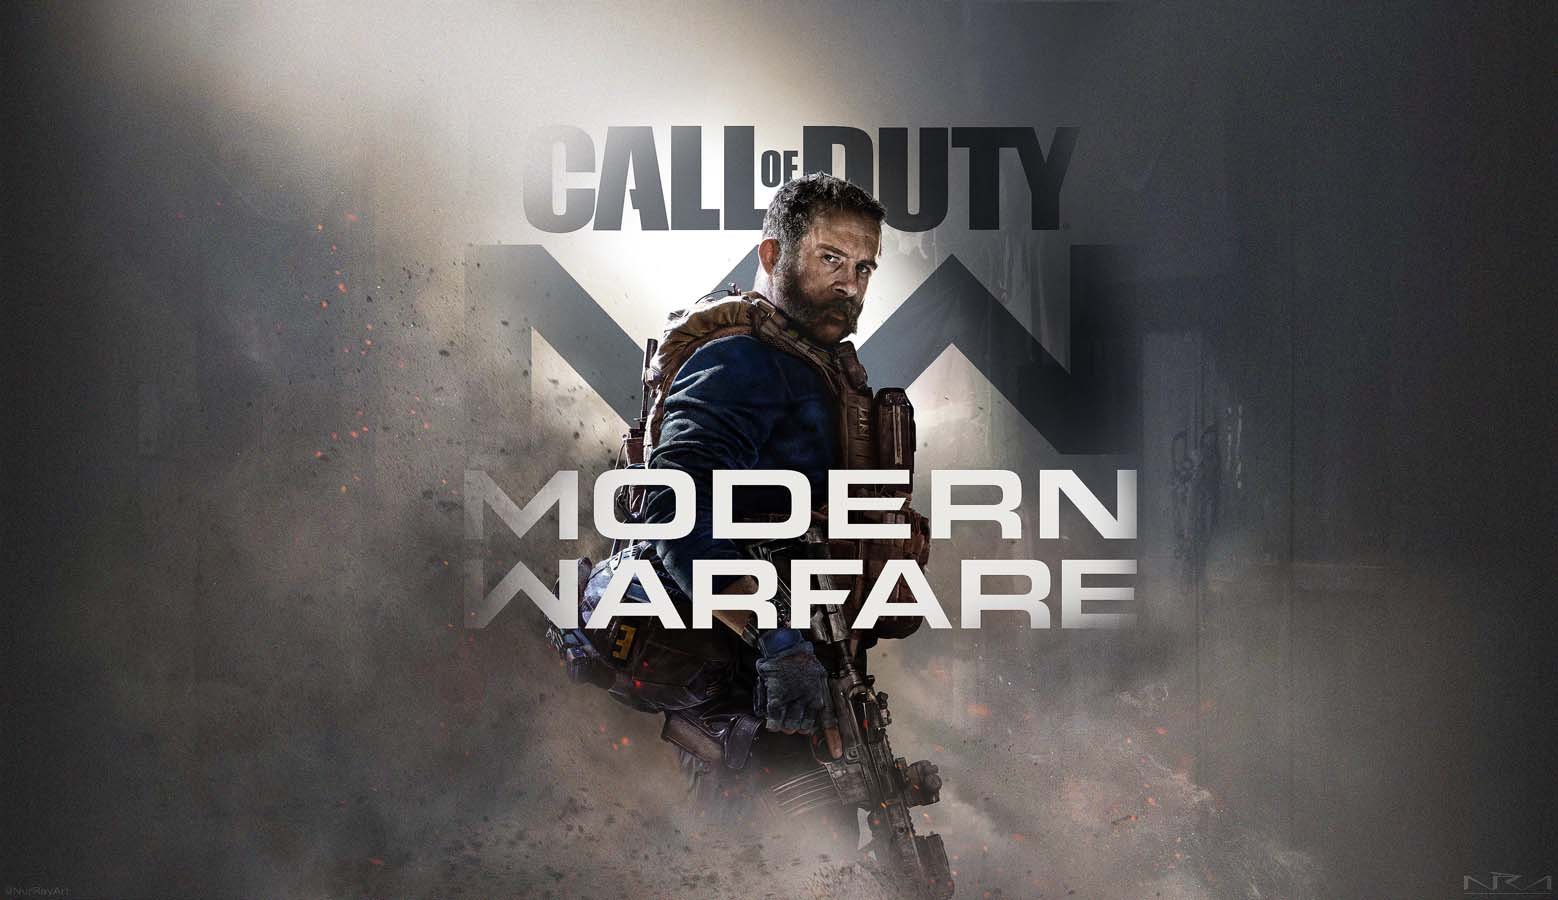 Call Of Duty Modern Warfare 123 All Call of Duty games in release order